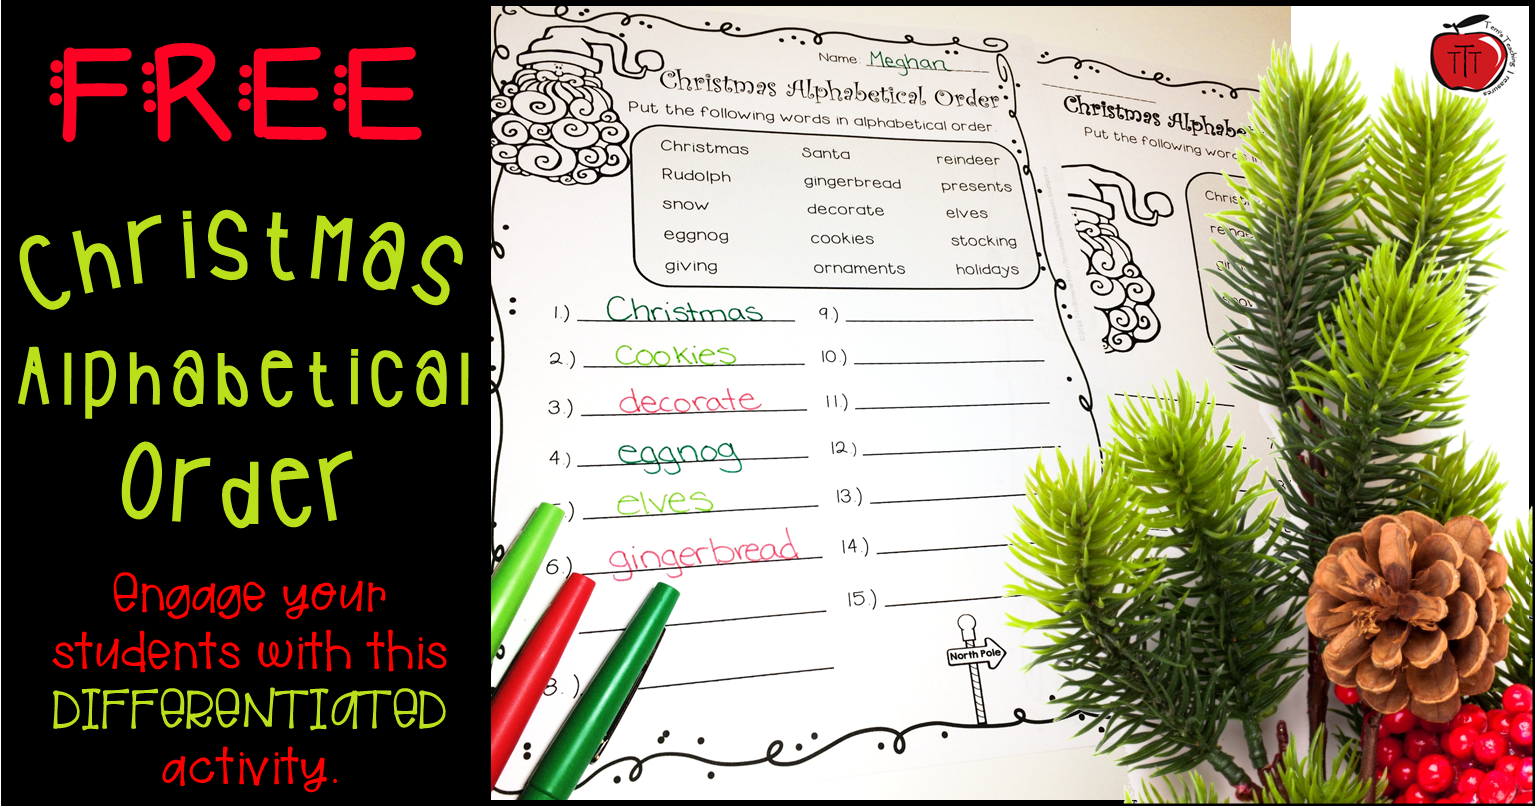 Free Christmas Alphabetical Order Worksheets - Classroom